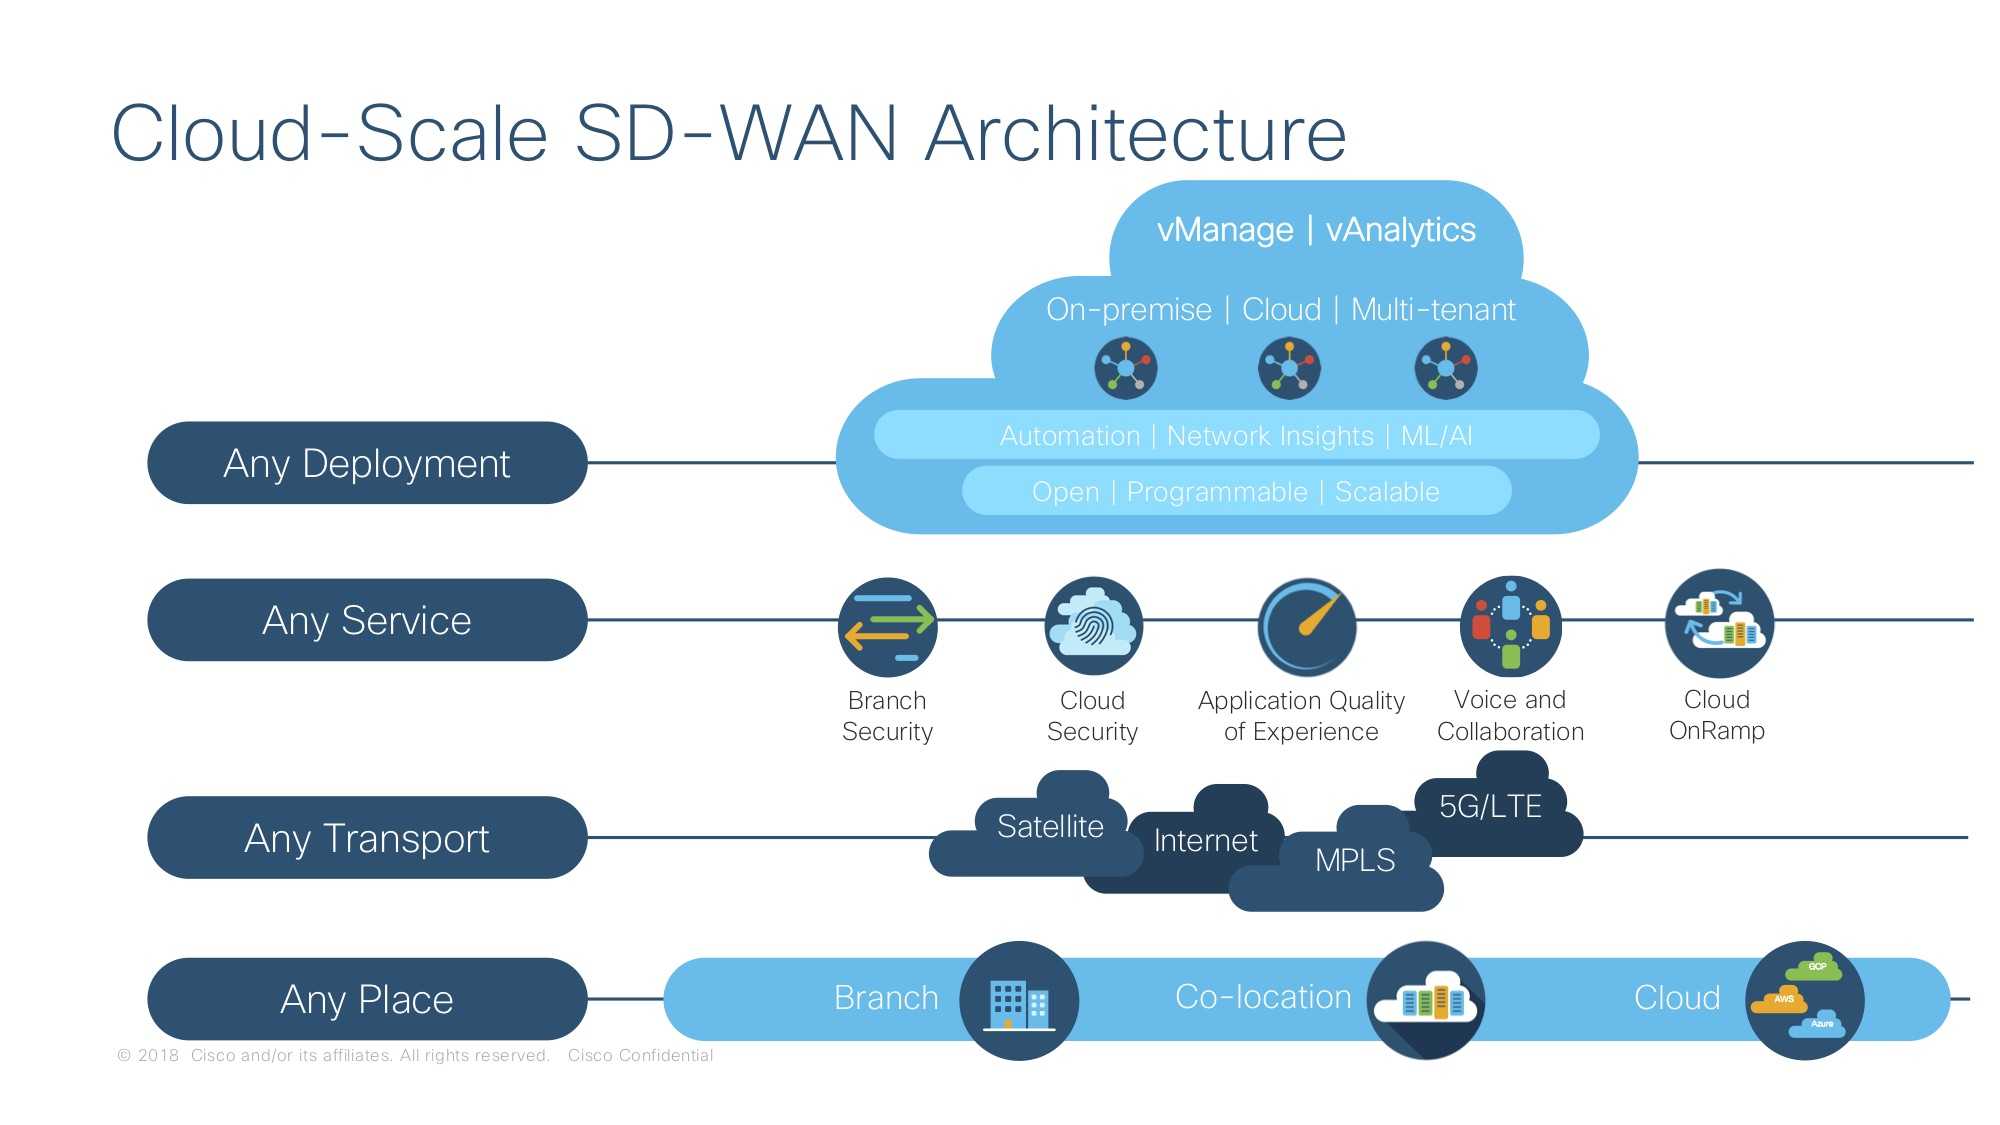 What is sd-wan (software-defined wan)?